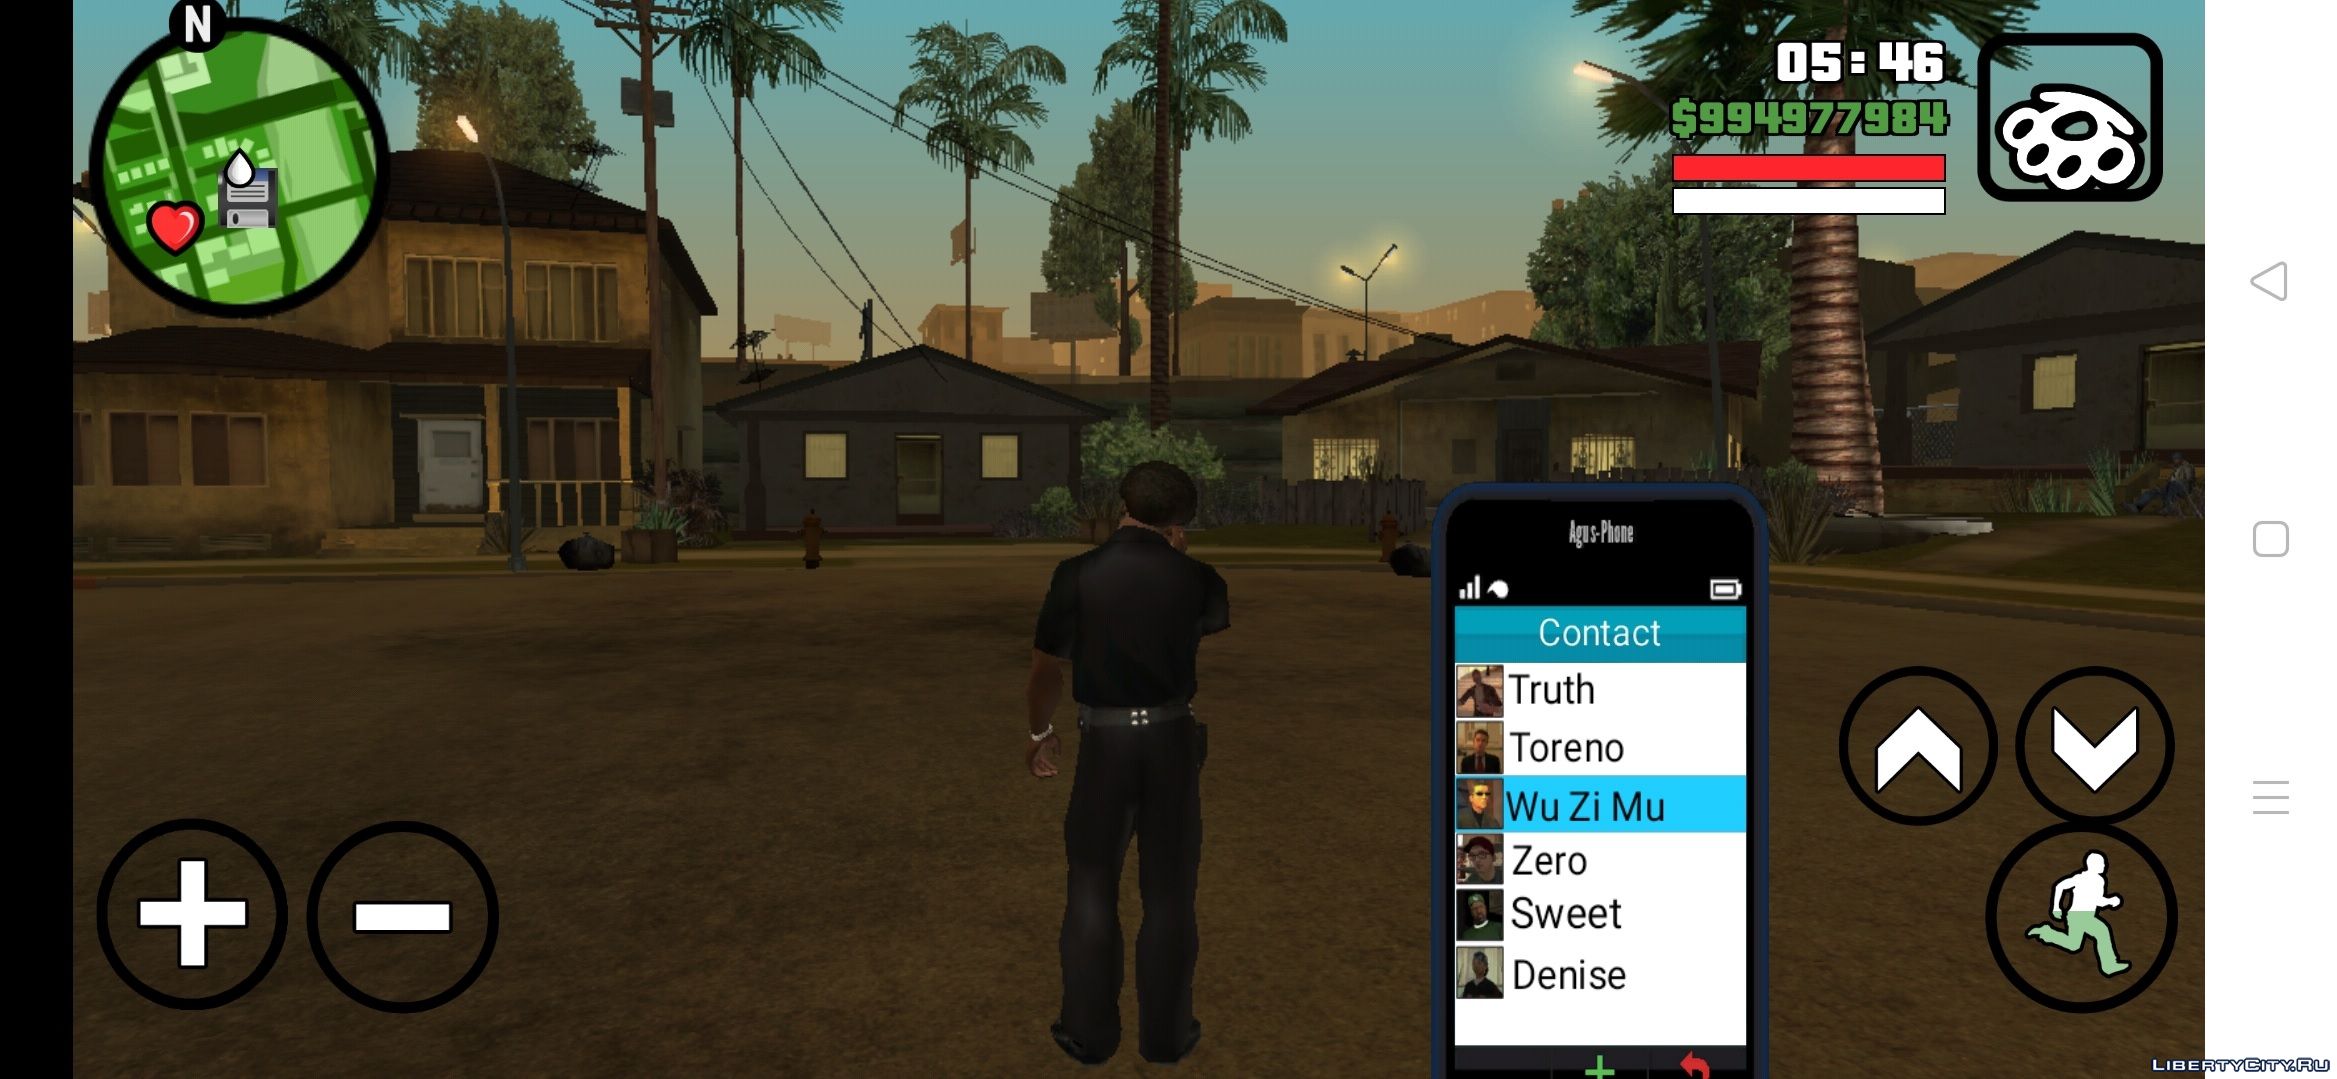 GTA San Andreas now available on iOS and Android - MobileSyrup